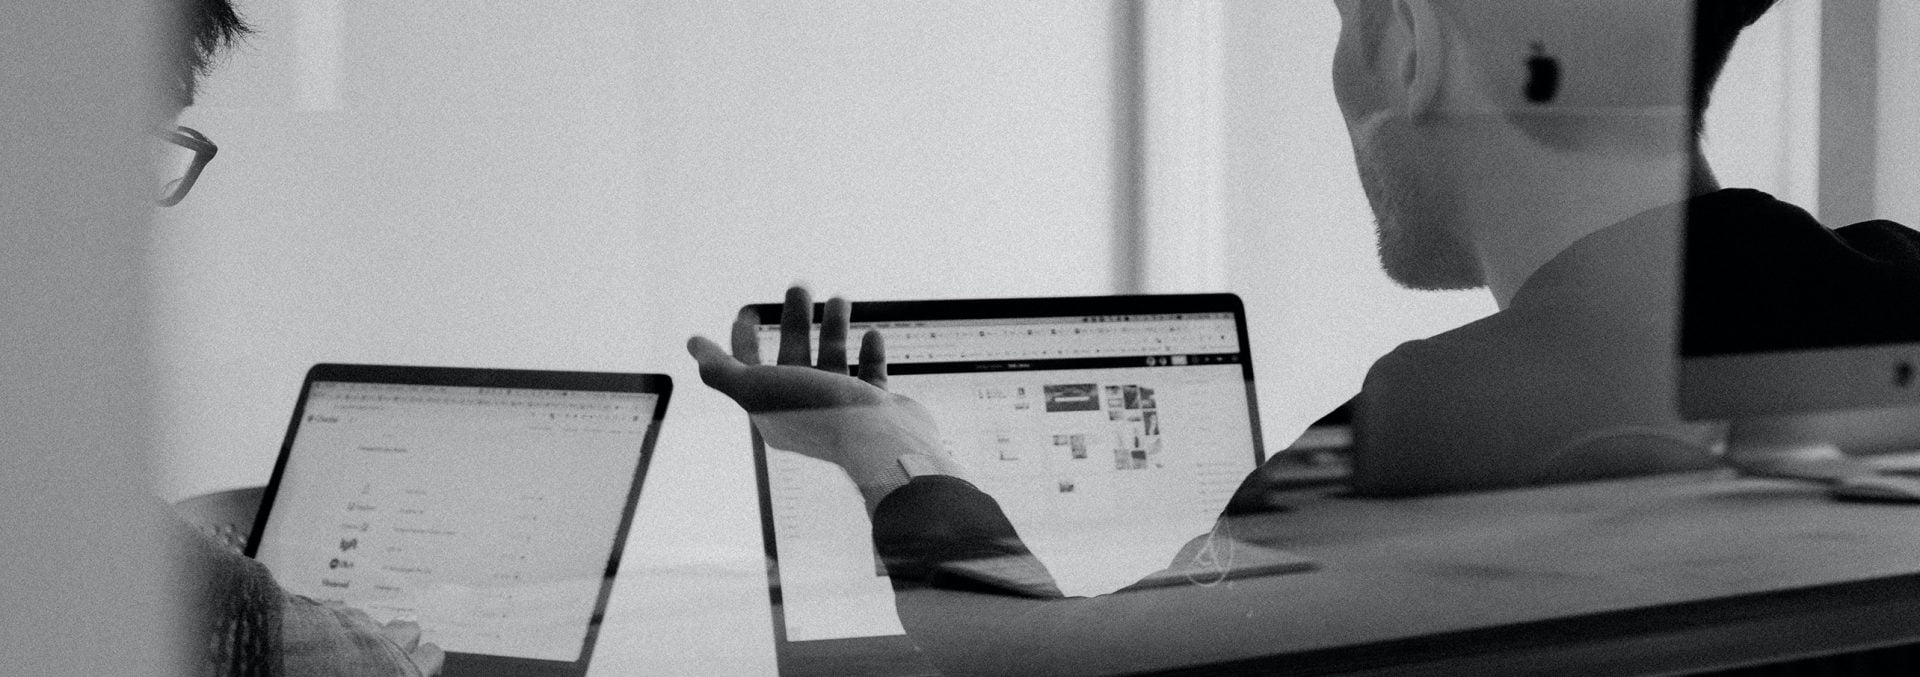 black and white photo of two teammates working together on their laptops